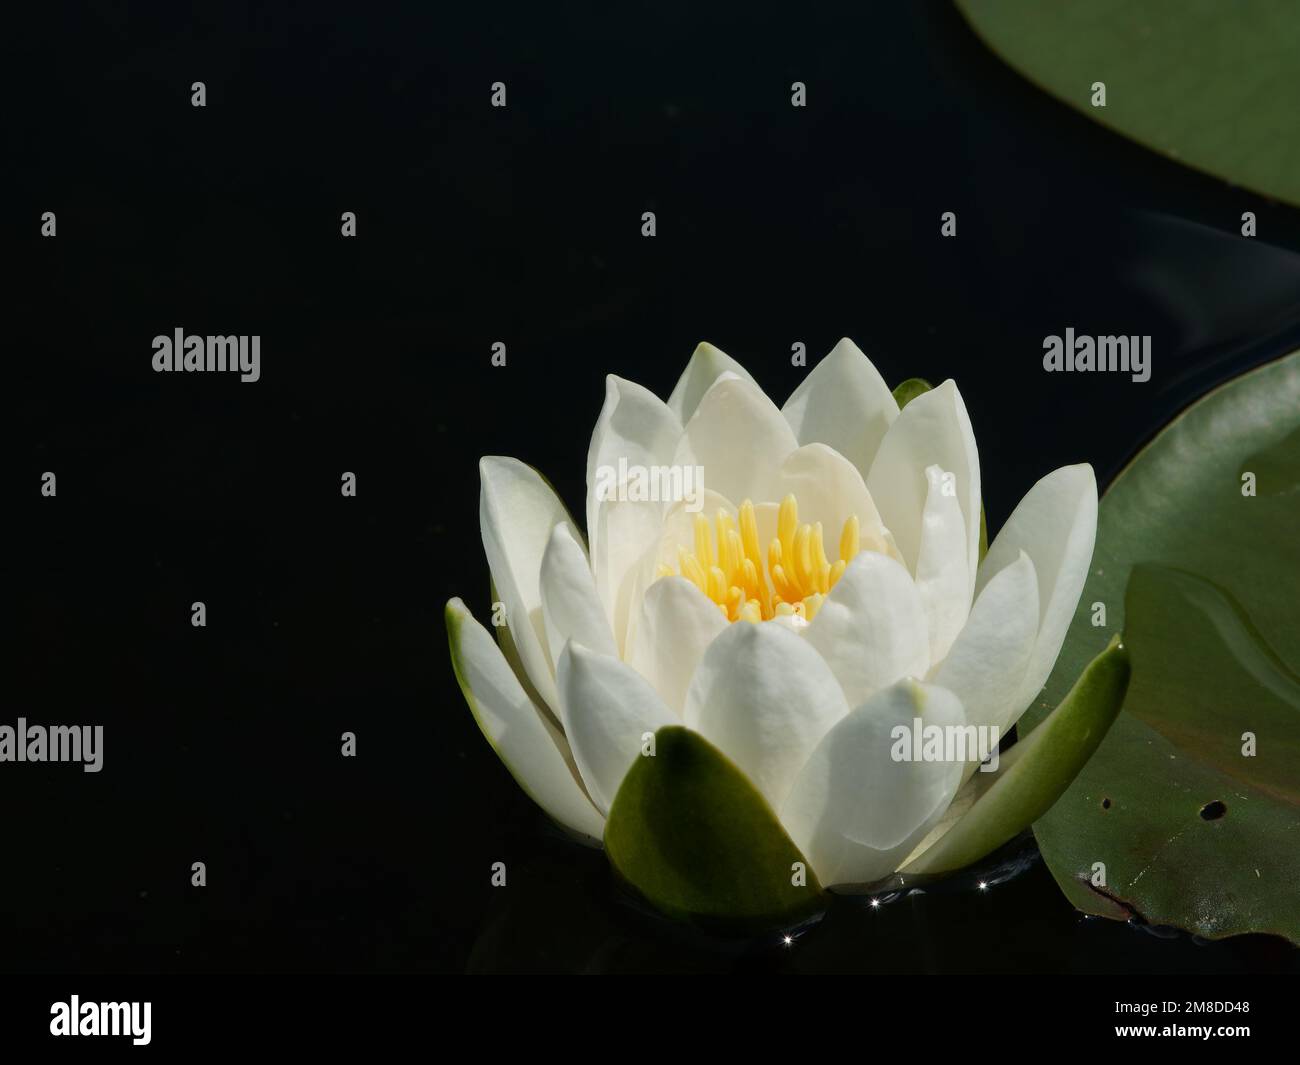 American white waterlily (Nymphaea odorata) floating flower and part of leaf, dark background Stock Photo